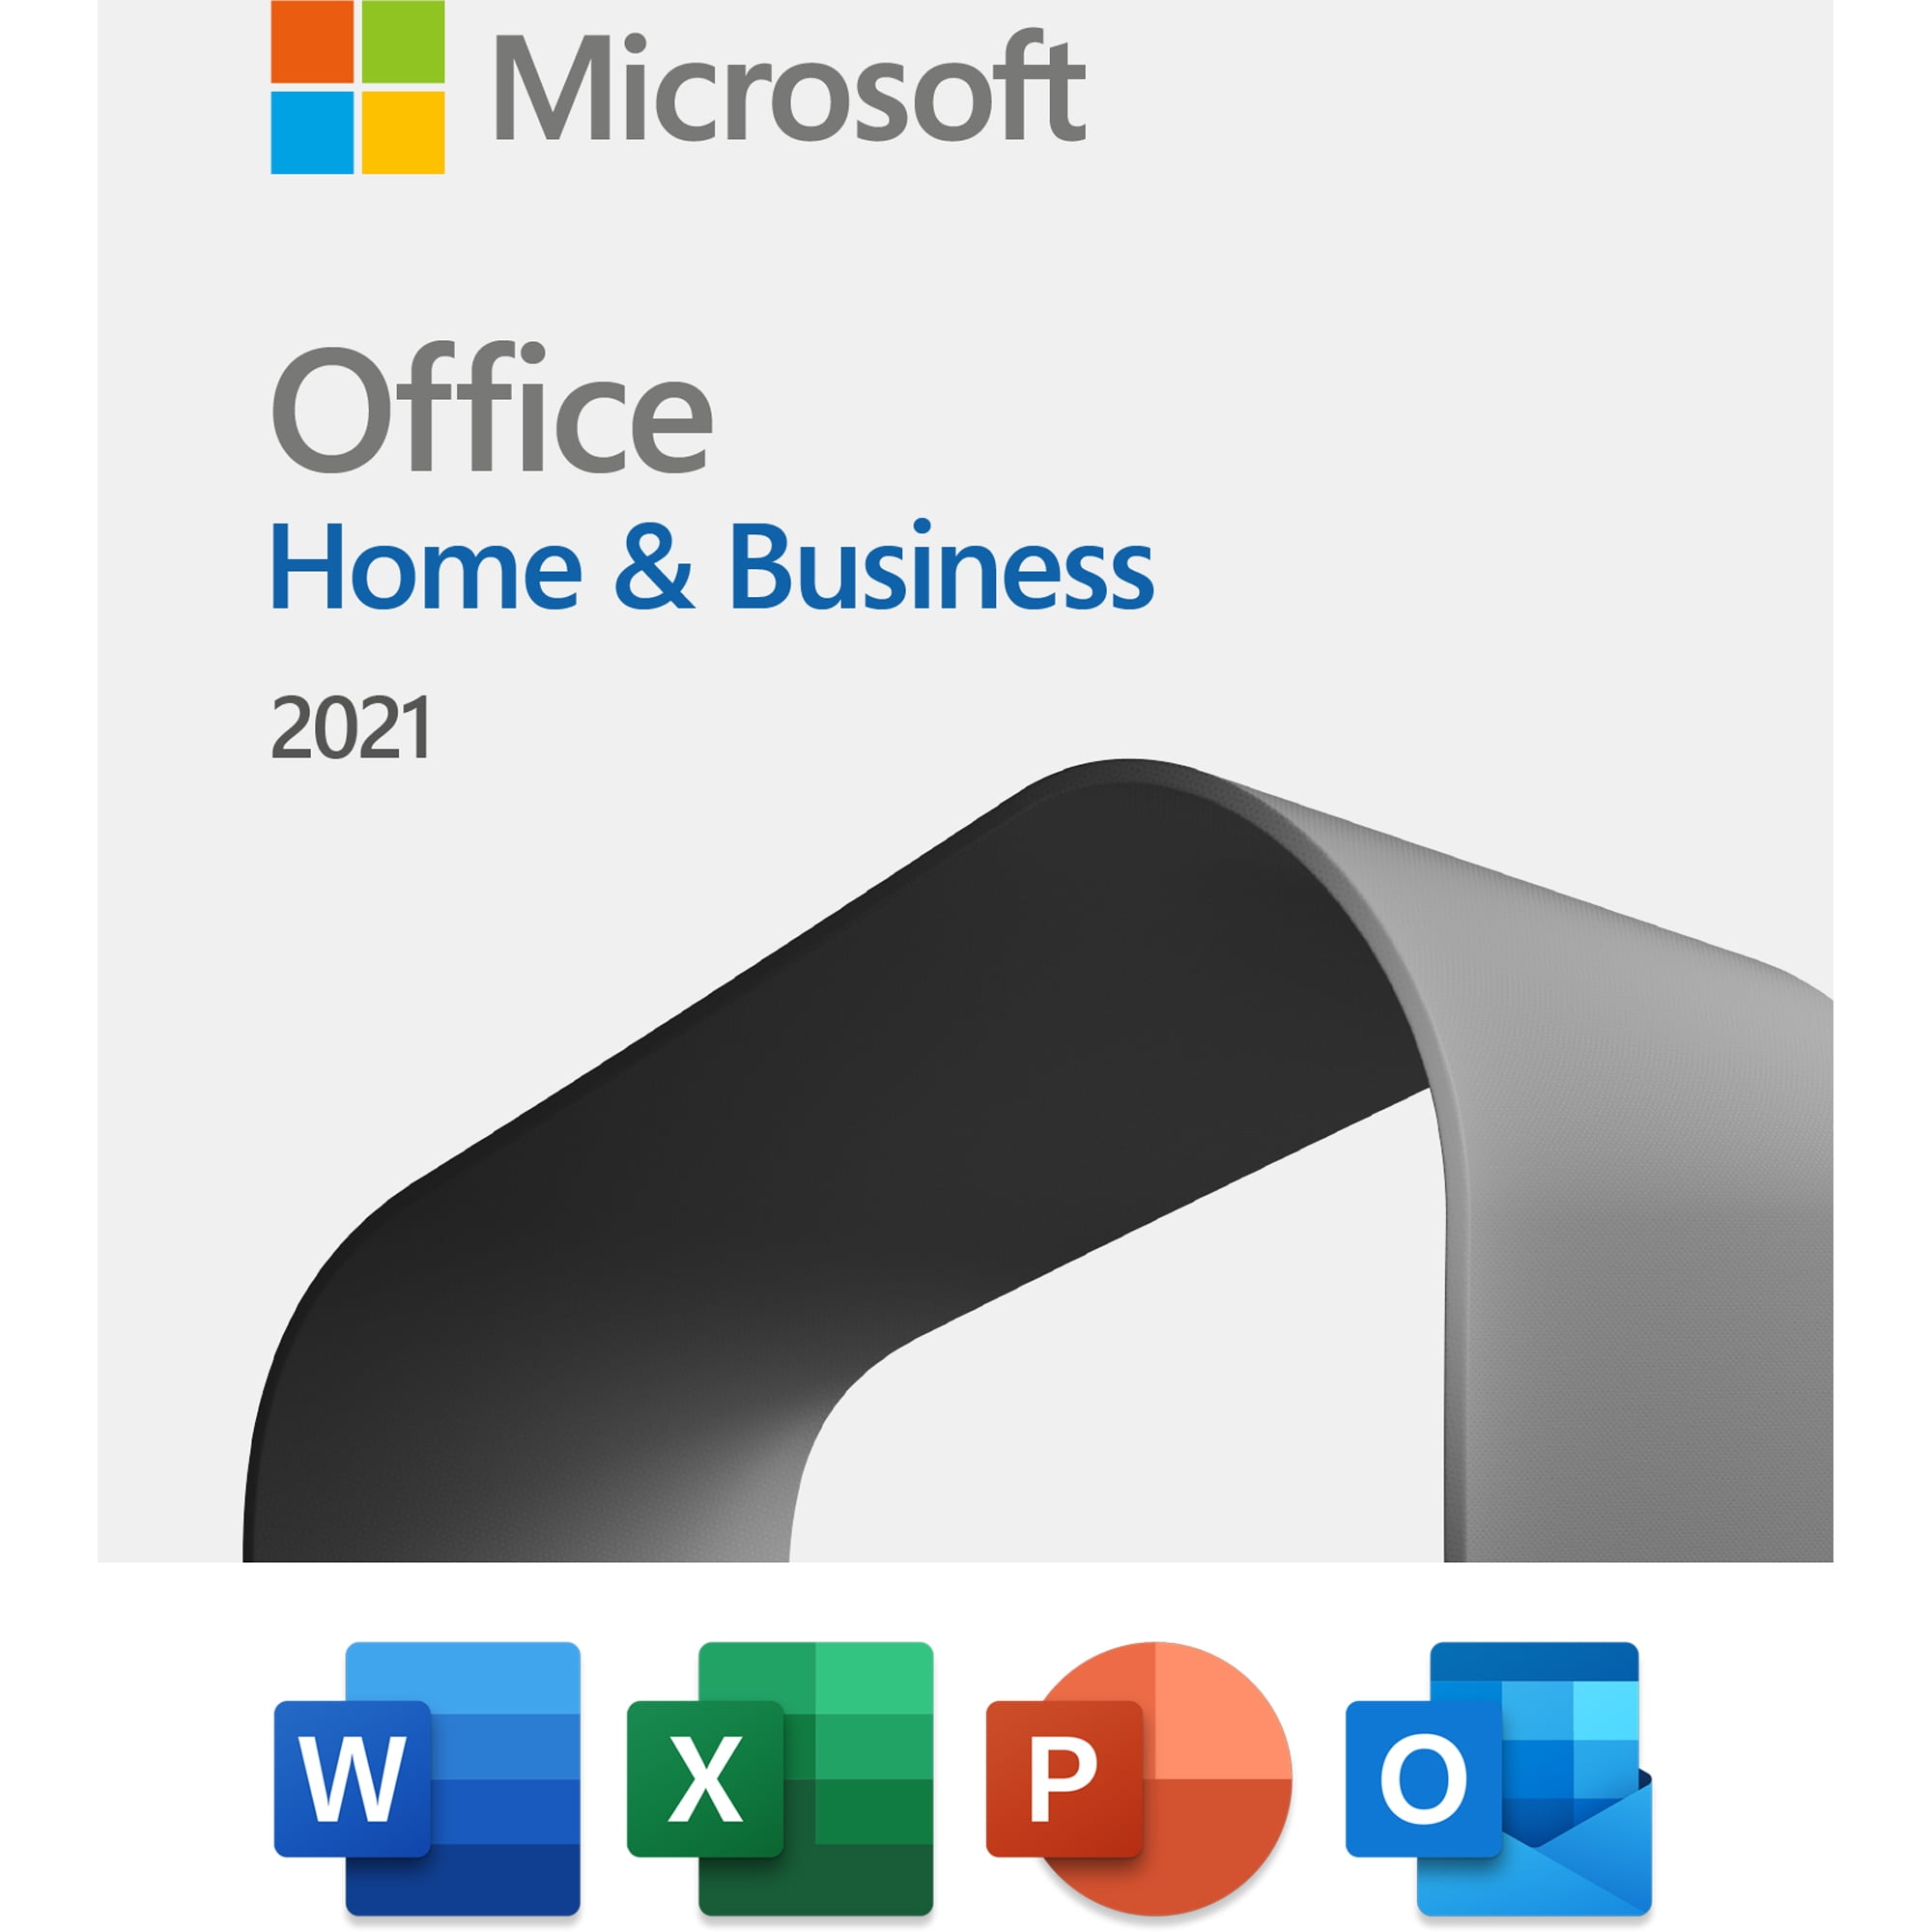 Microsoft Office Home & Business 2021, One-time purchase for 1 PC